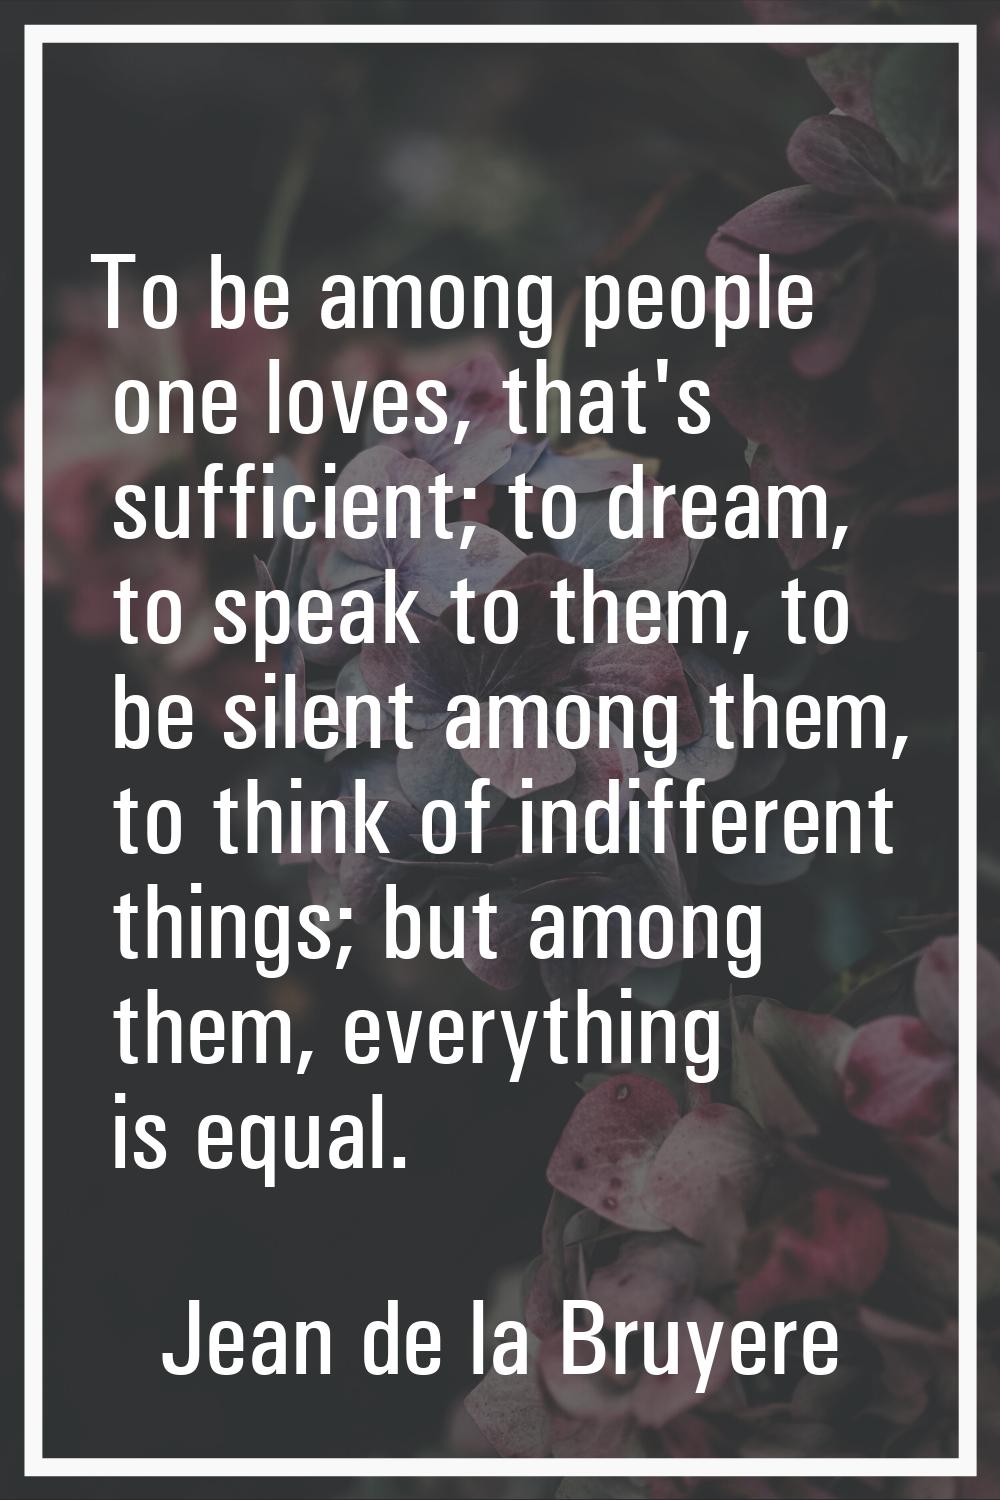 To be among people one loves, that's sufficient; to dream, to speak to them, to be silent among the